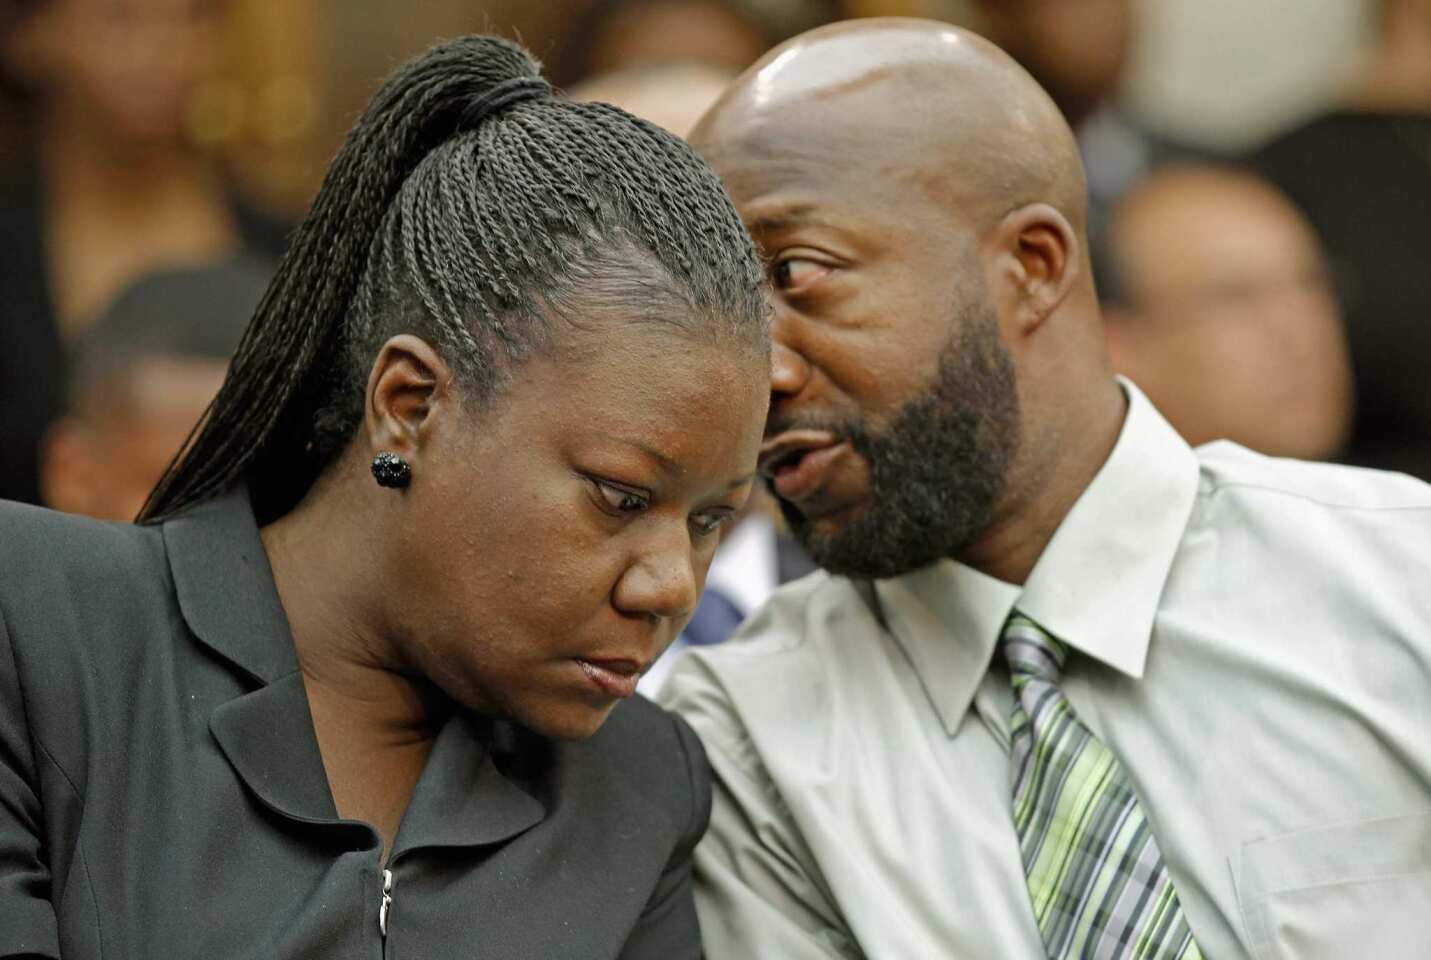 Sybrina Fulton and Tracy Martin, Trayvon Martin's parents, attend a House briefing in Washington on March 27. Tracy Martin called for supporters to continue working to make sure his son "did not die in vain."